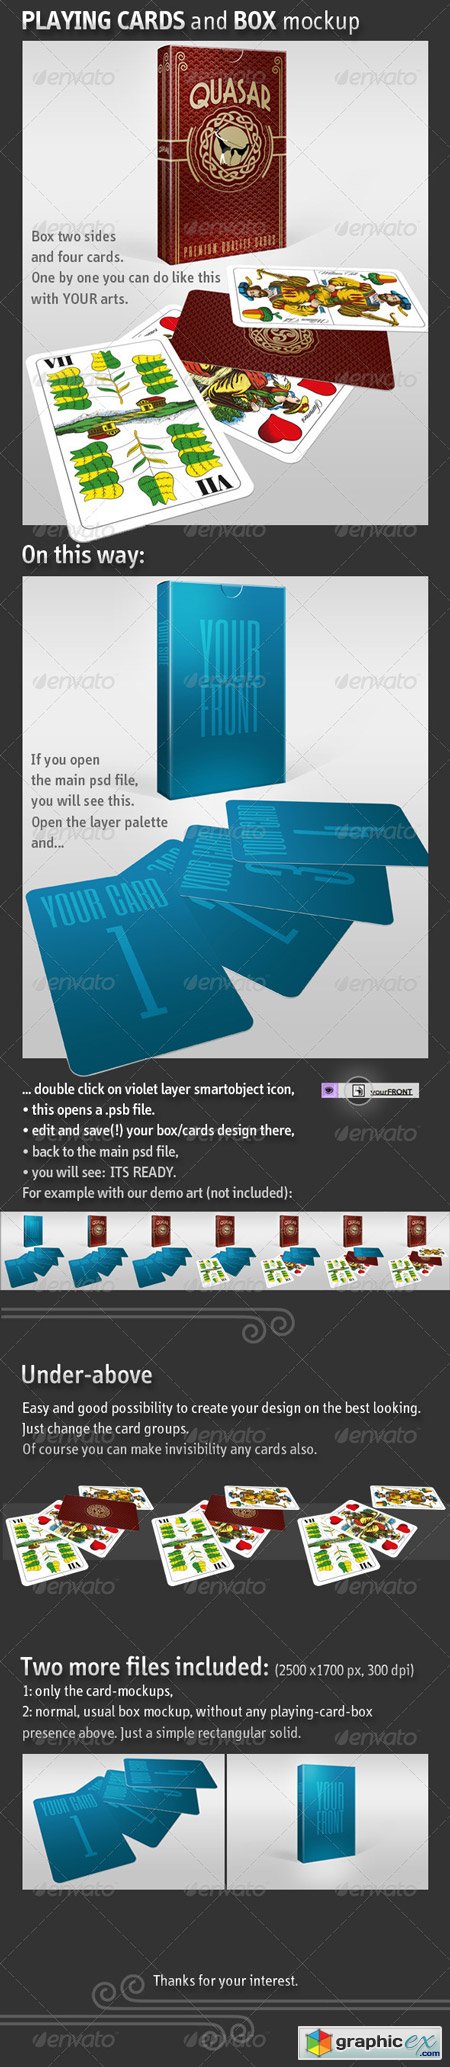 Playing Card - Business Card and Box Mockup 5595309